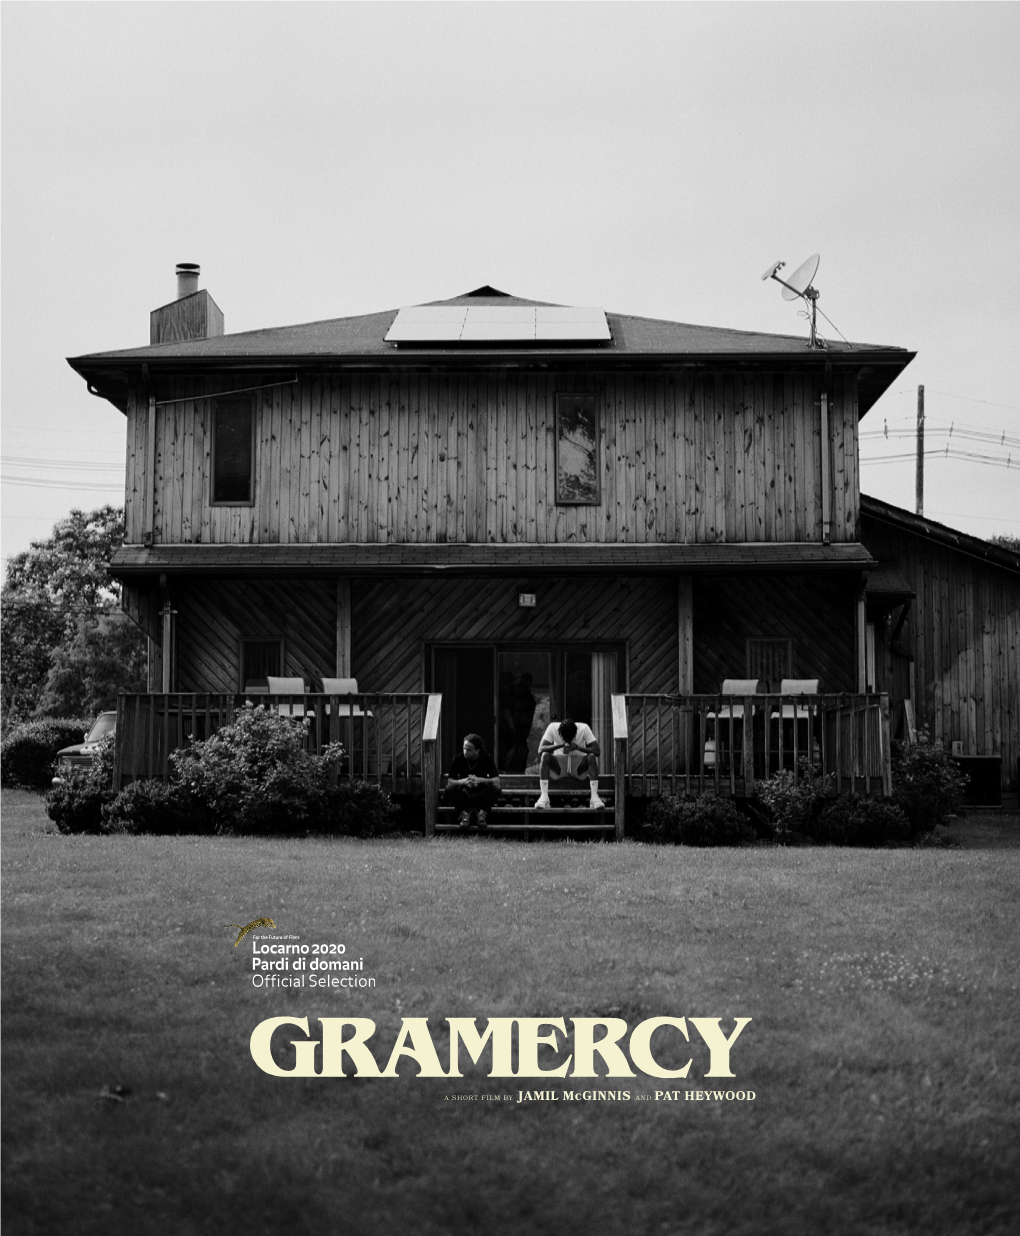 GRAMERCY a Short Film by JAMIL Mcginnis and PAT HEYWOOD GRAMERCY SENECA VILLAGE PICTURES Presents in Association with REFRAME the WORLD and PUTSHKI